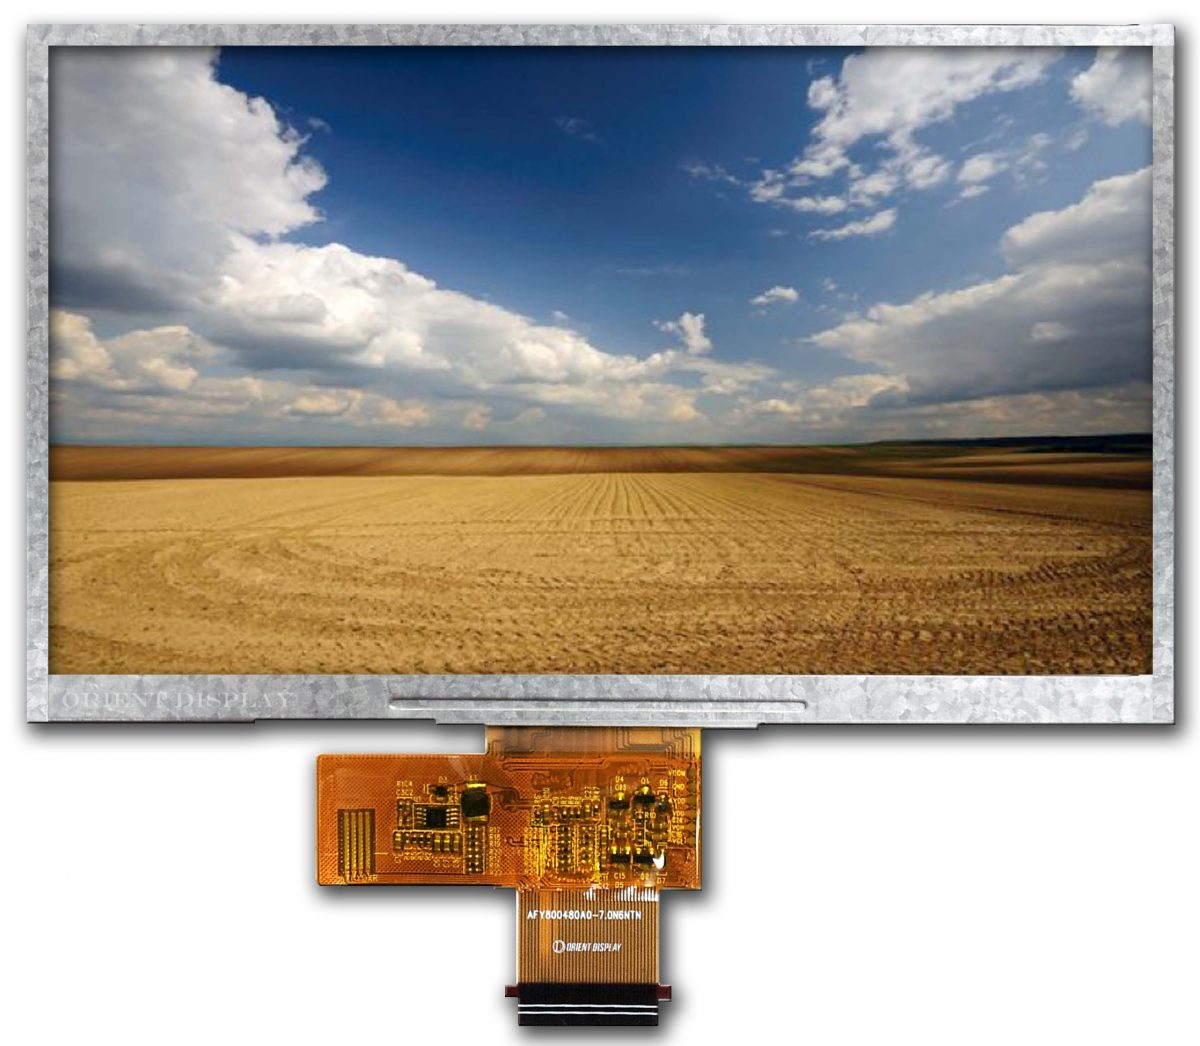 Orient Display: Color TFT/Thin Film Transistor LCD, 7.0 inch 800*480 TFT LCD Display with FPC connection